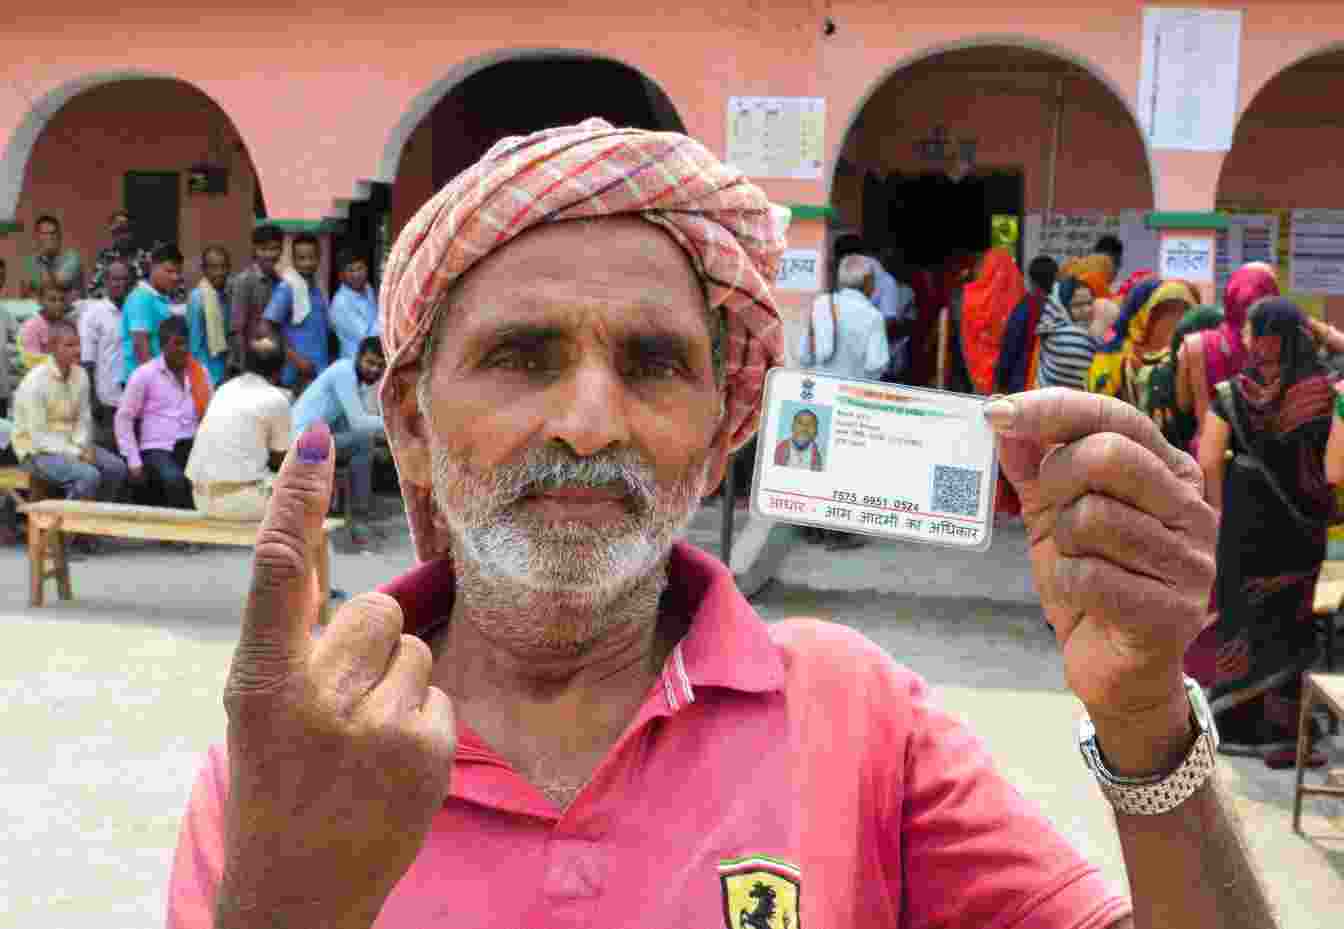 Over 22.70 per cent of voters have exercised their franchise in Sitamarhi, 22.45 per cent in Muzaffarpur, 22.37 per cent in Madhubani, 20.75 per cent in Saran and 17.36 per cent in Hajipur till 11 am.